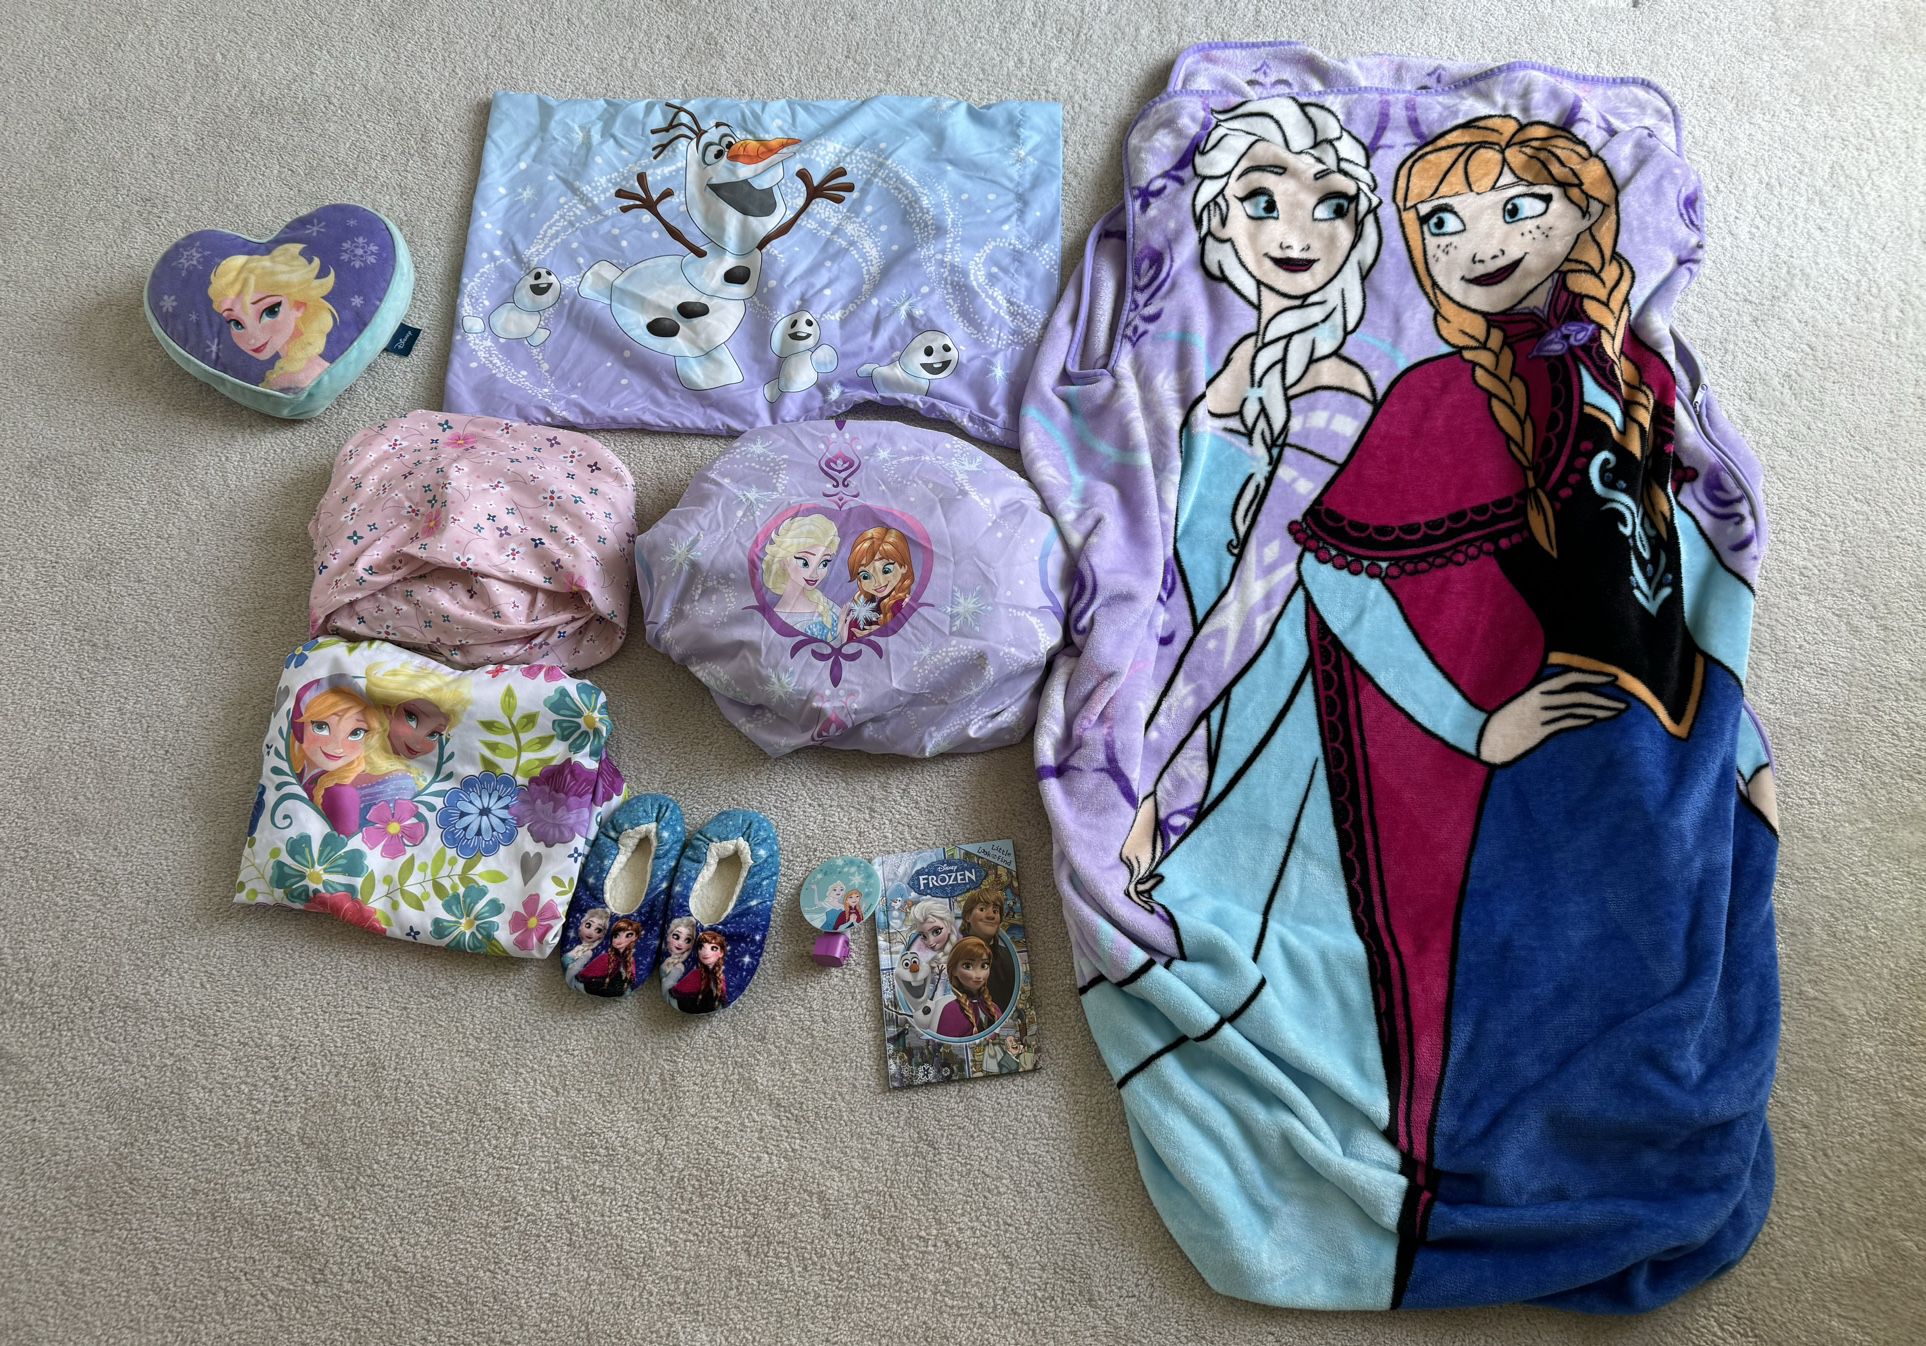 Disney Frozen Elsa and Anna twin bedding sets plus extras - in EUC!